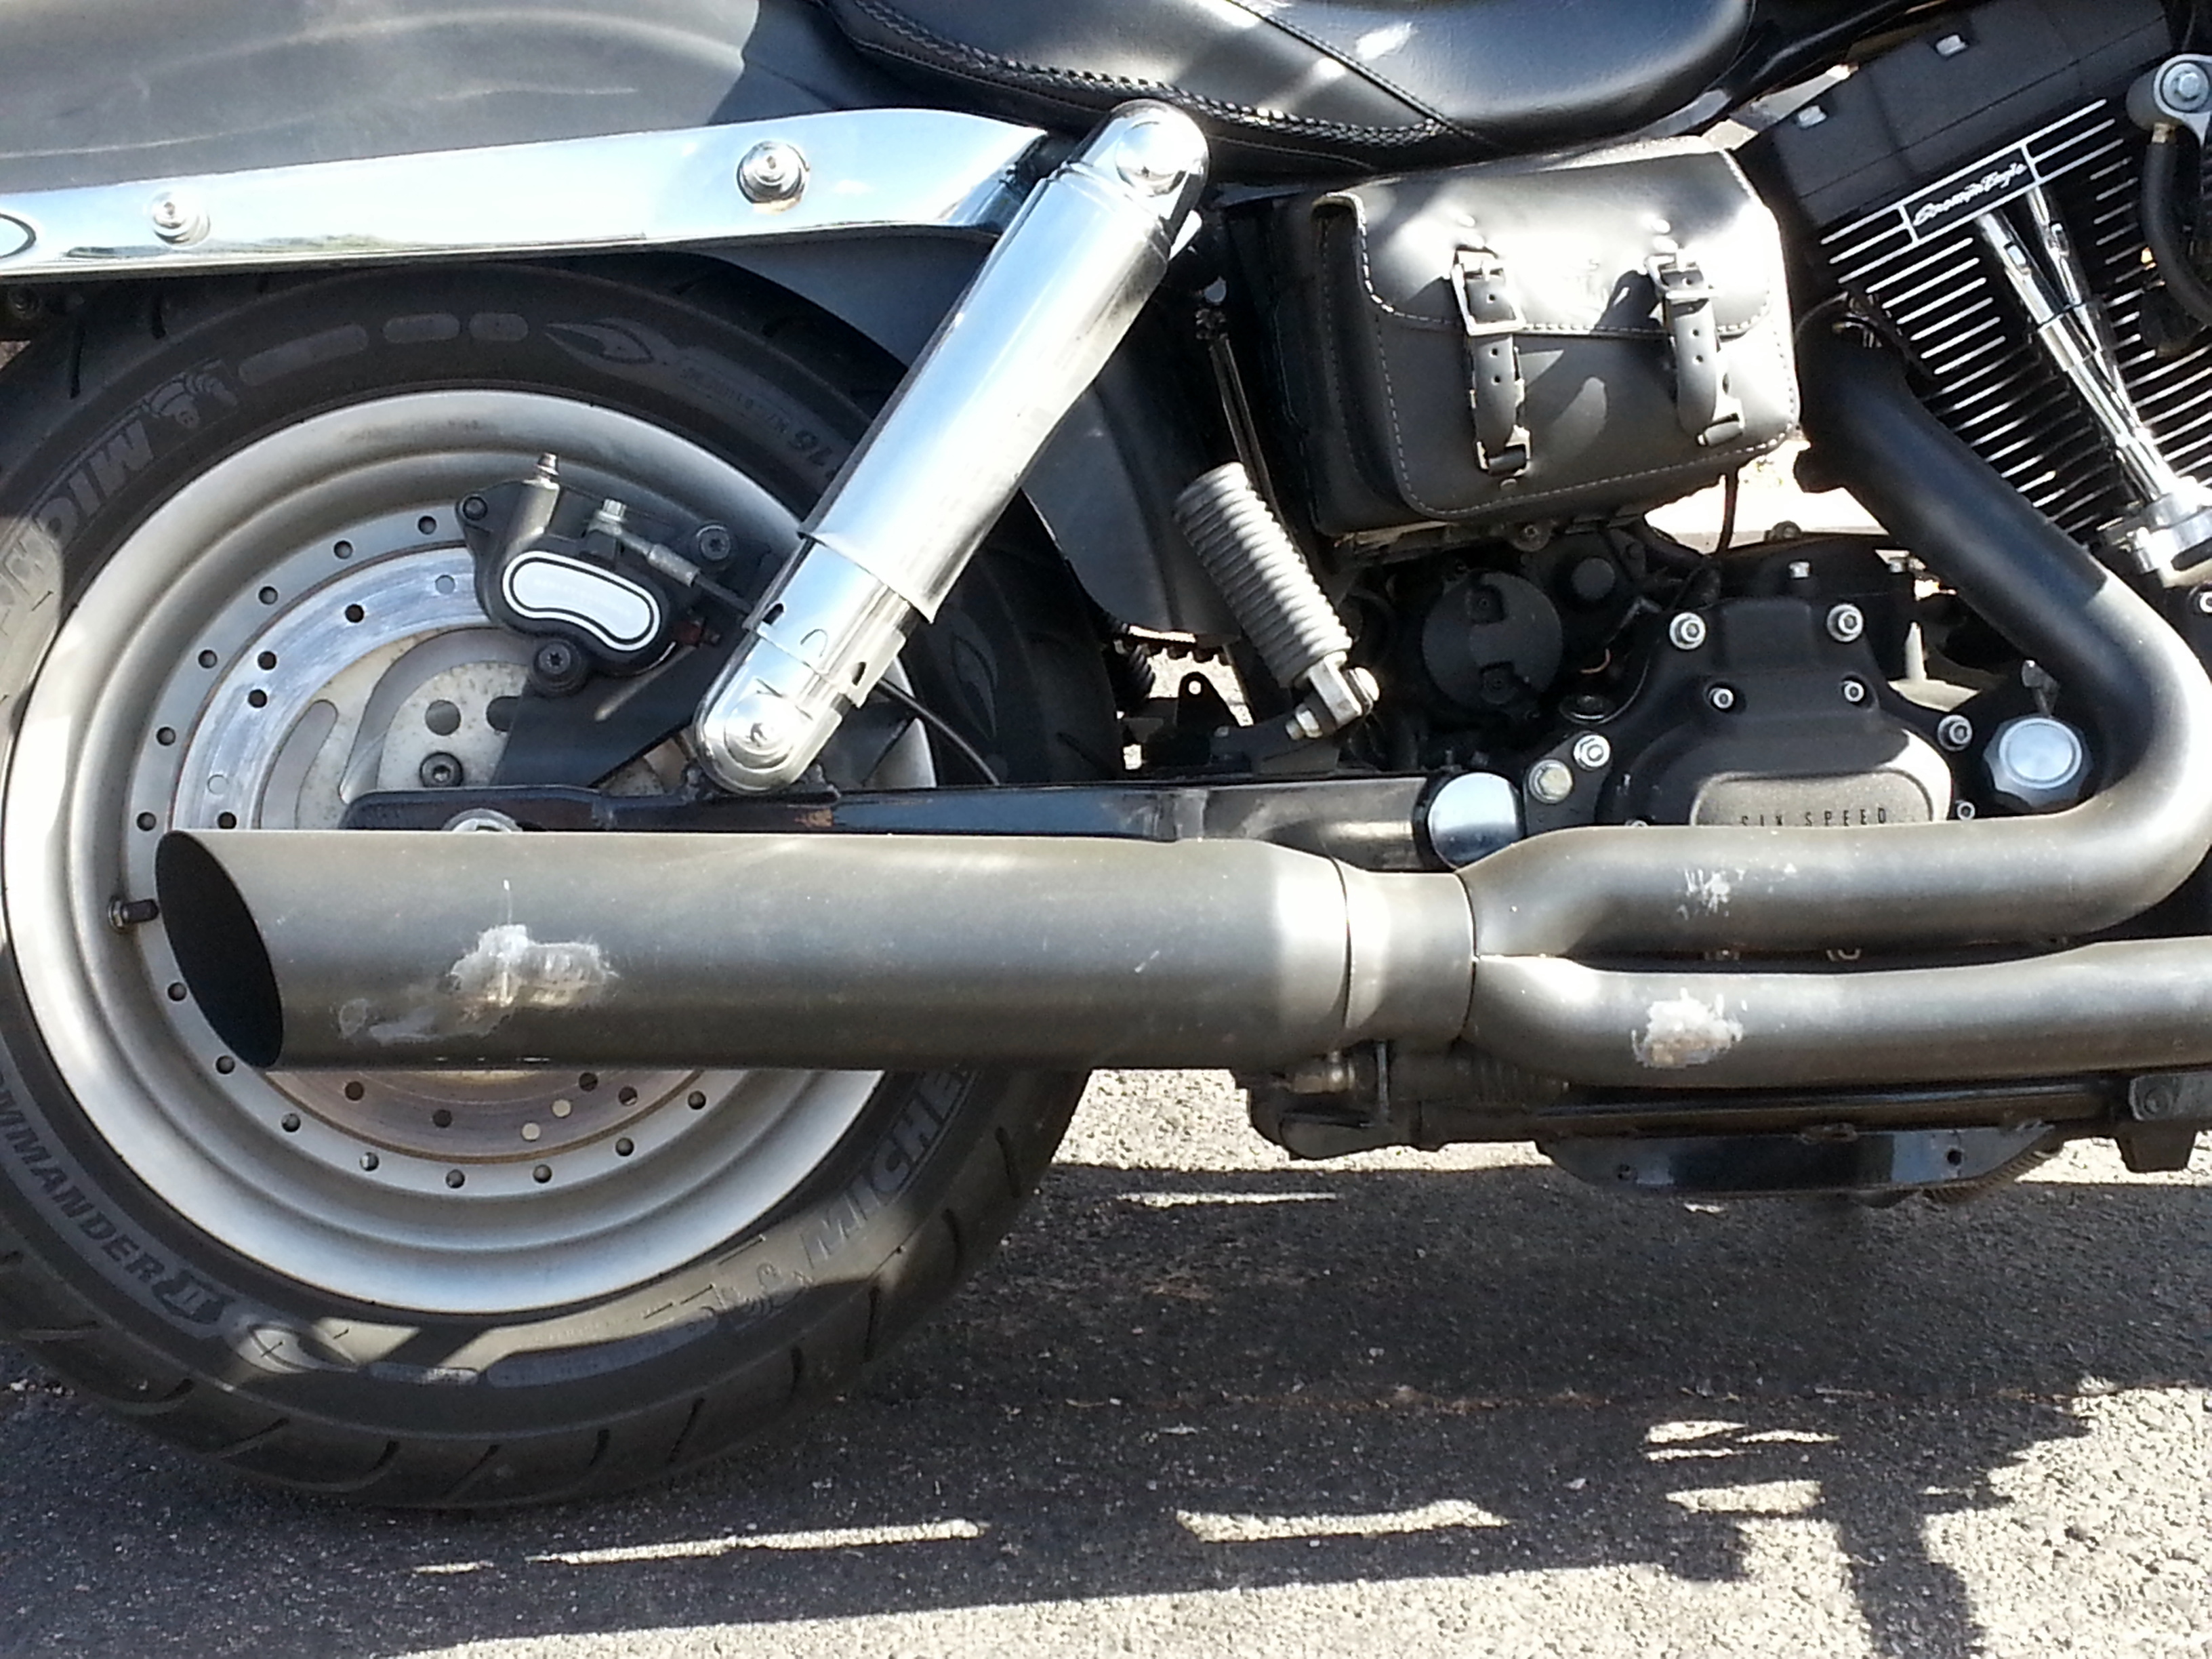 High Temp Paint On Damaged Pipes Harley Davidson Forums